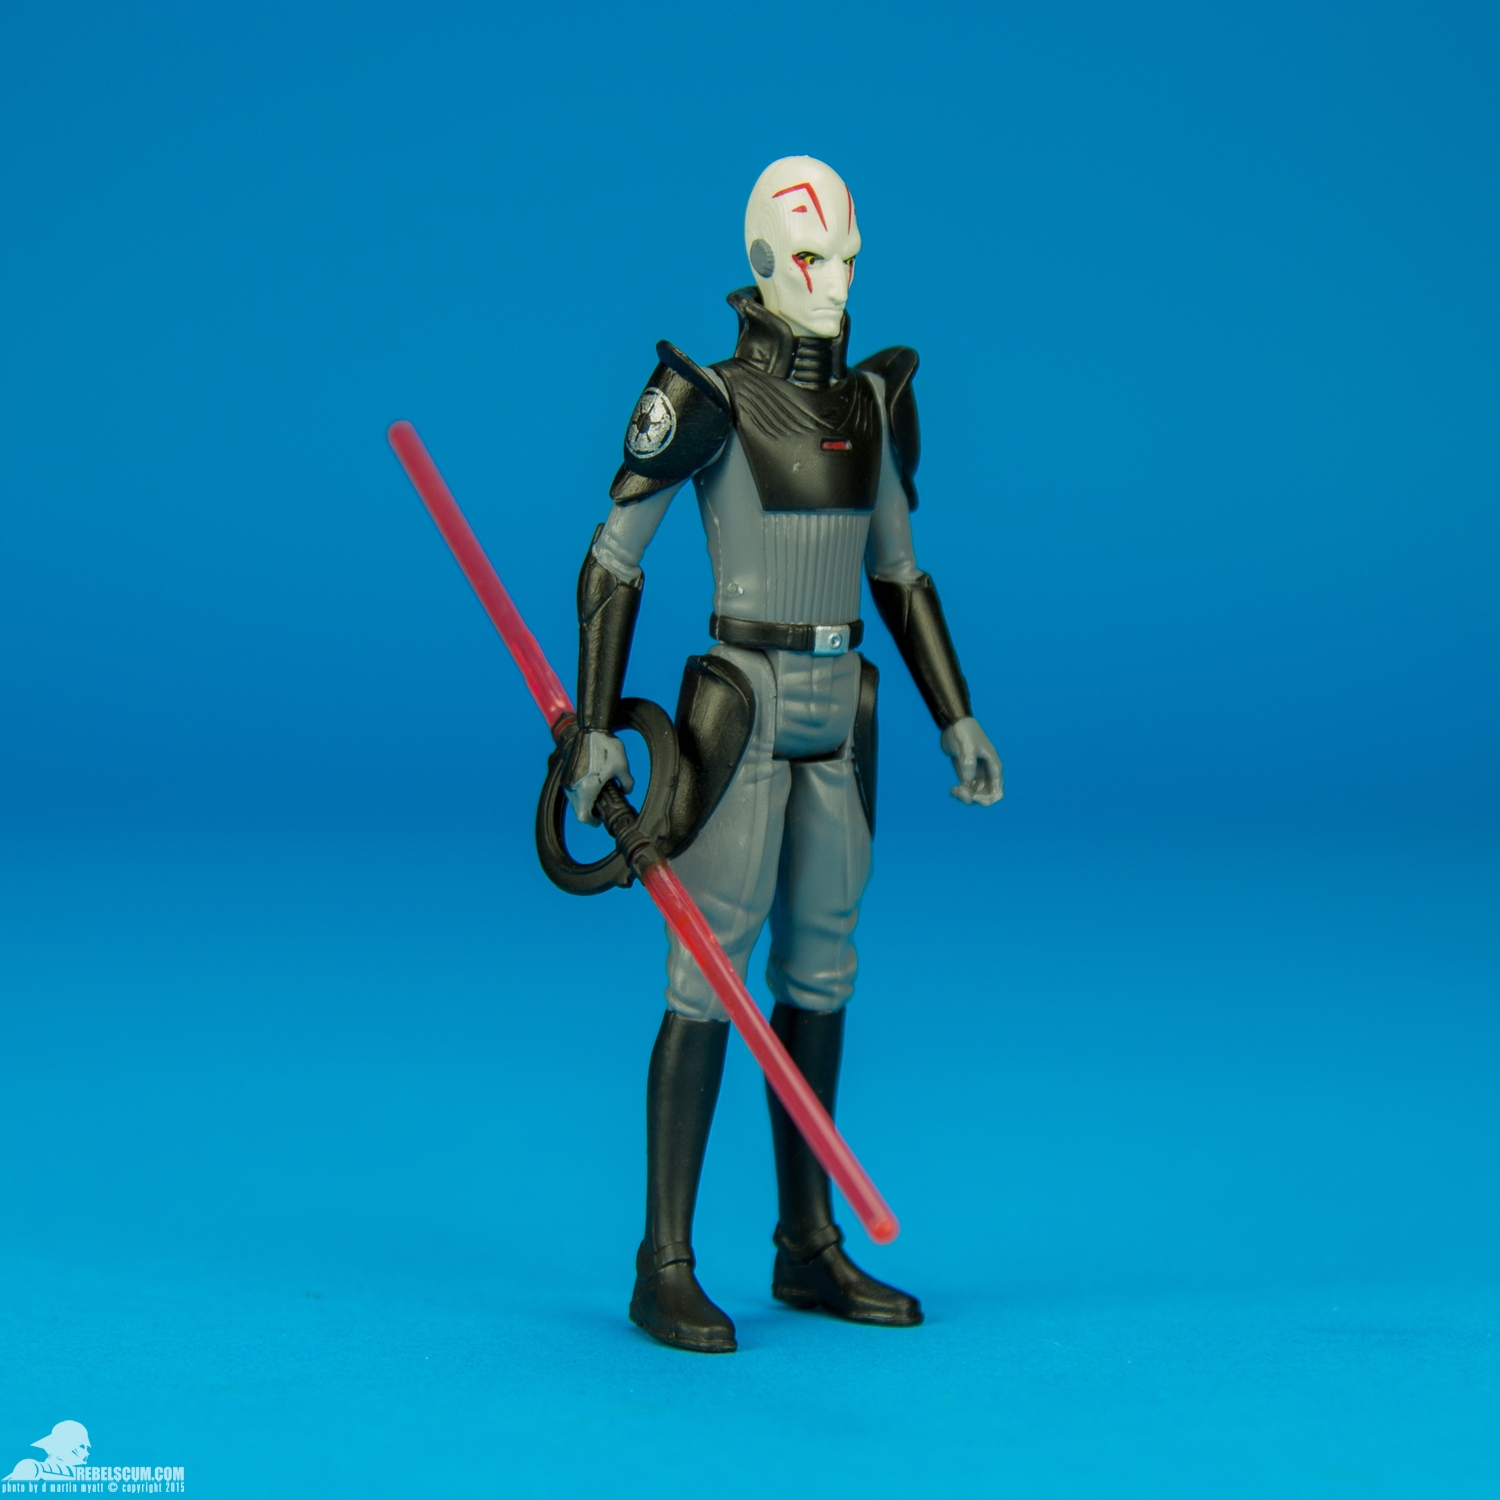 The-Inquisitor-Star-Wars-The-Force-Awakens-006.jpg